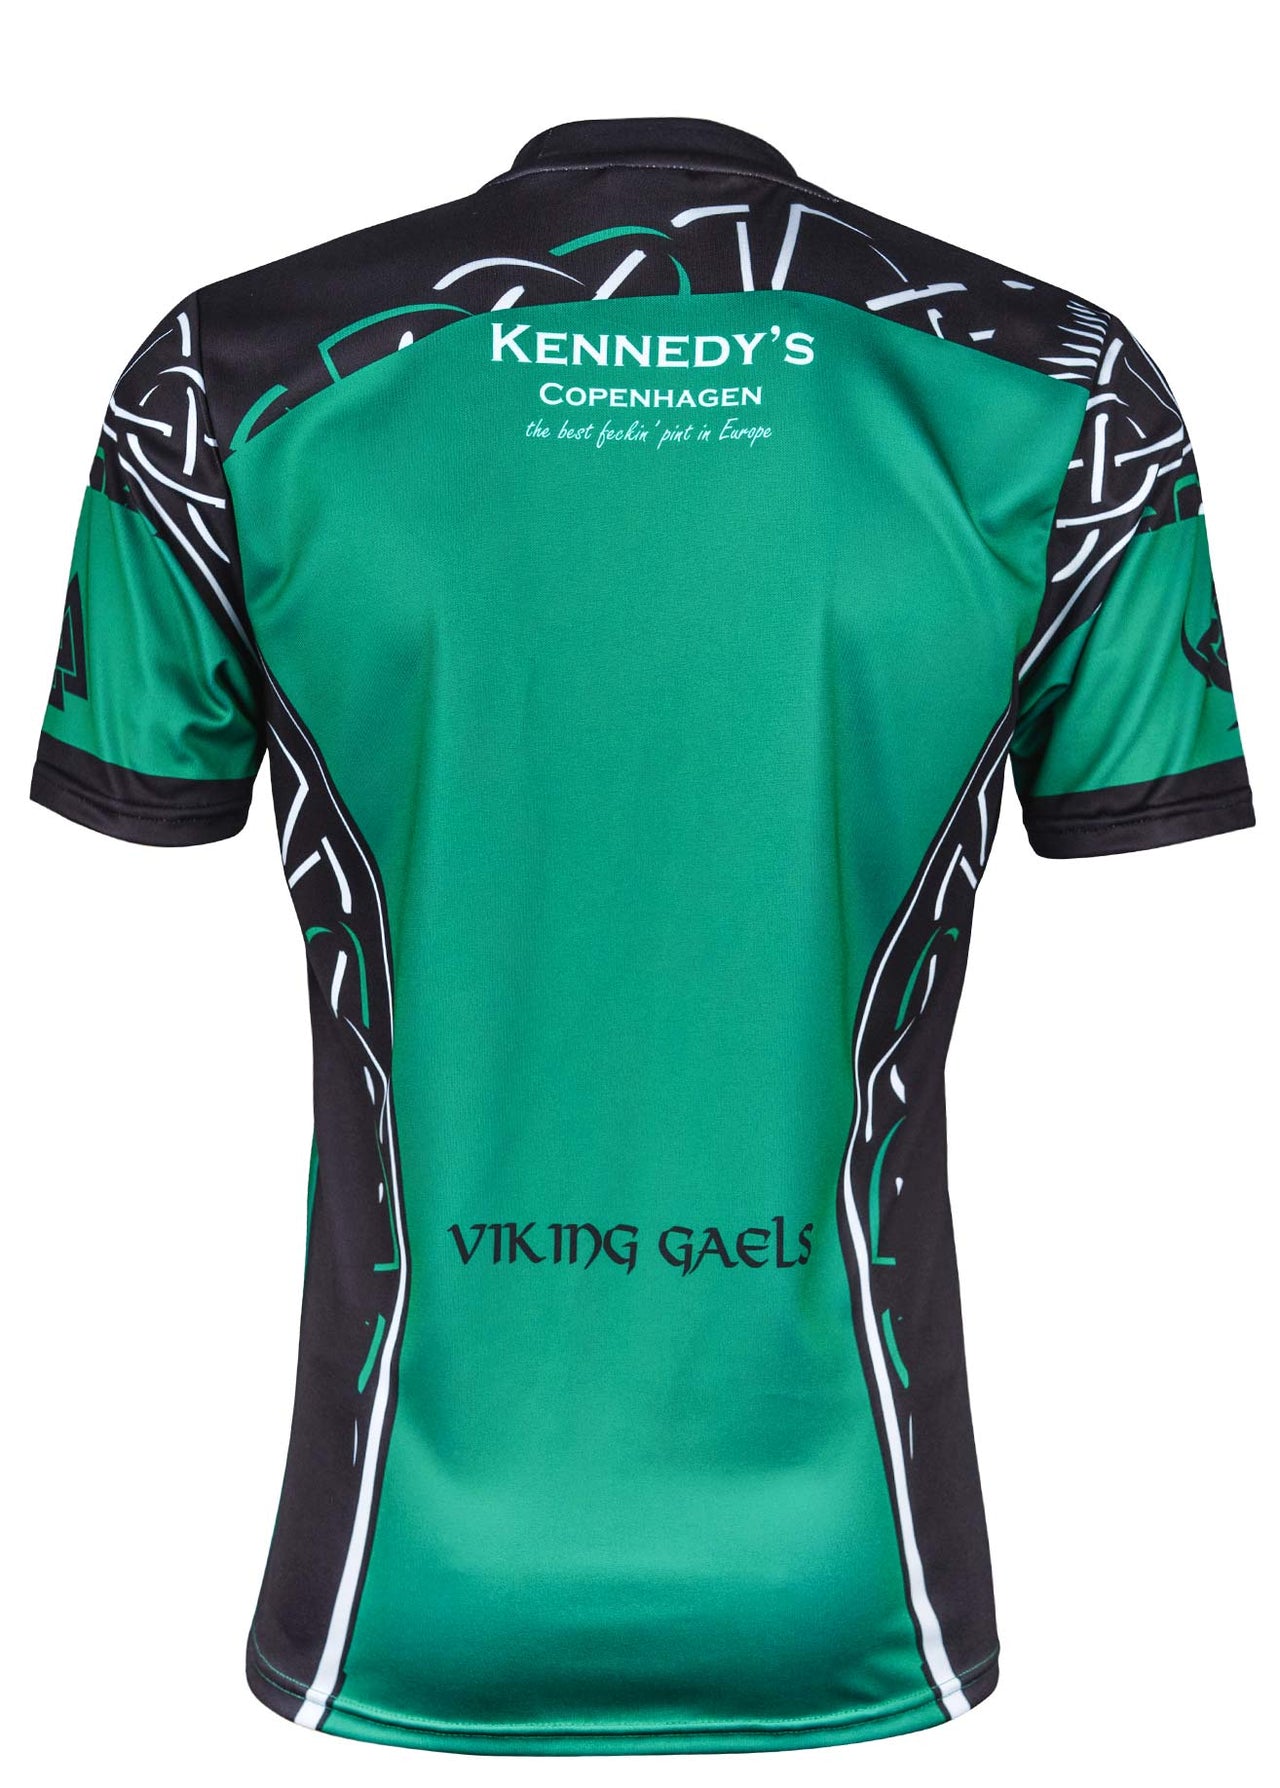 New Viking Gaels Goalkeeper Jersey Player Fit Adult